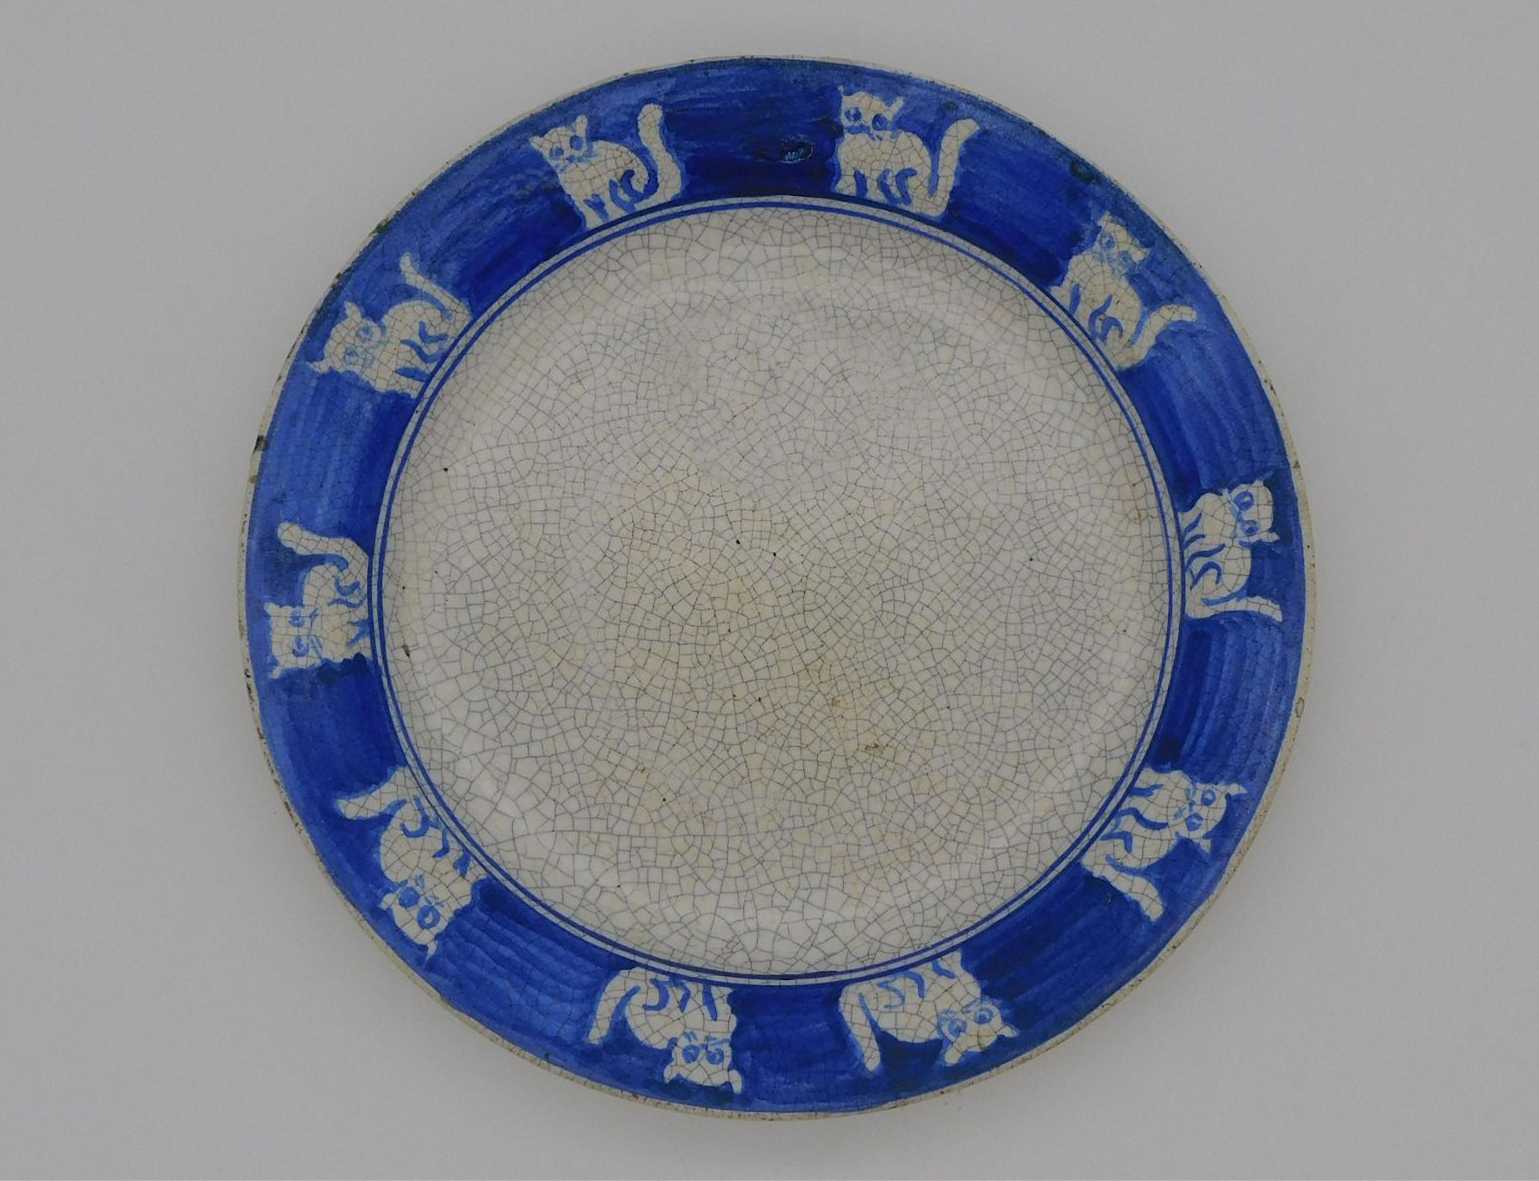 This early Dedham Pottery plate having a repeating cat border went out at $3,600 plus the buyer’s premium in April 2023. Image courtesy of Marion Antique Auctions and LiveAuctioneers.